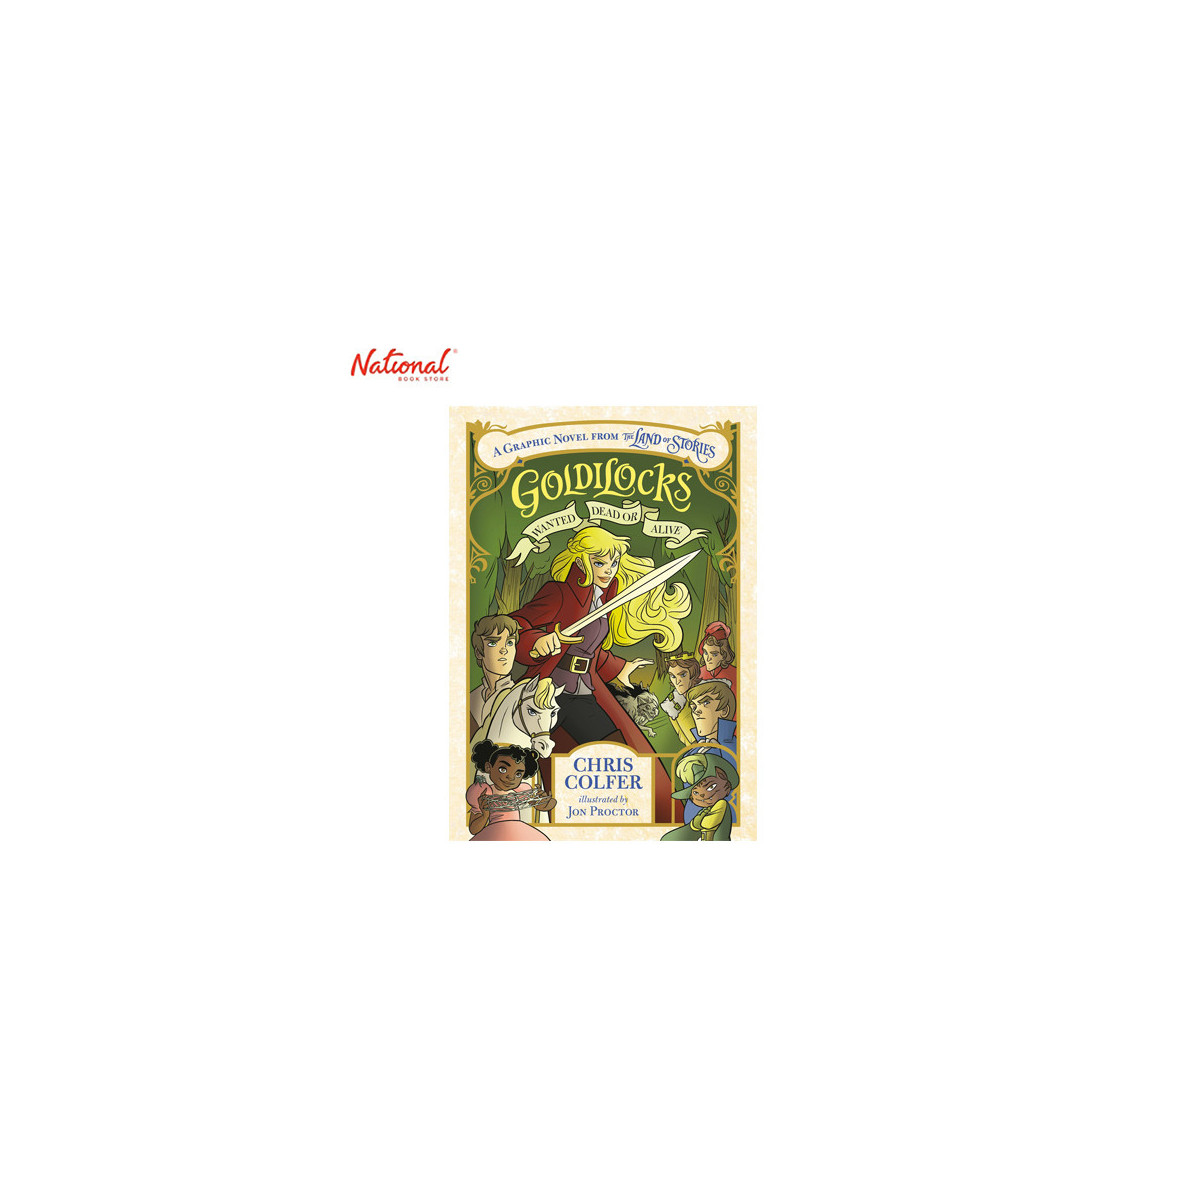 Goldilocks: Wanted Dead or Alive Trade Paperback by Chris Colfer